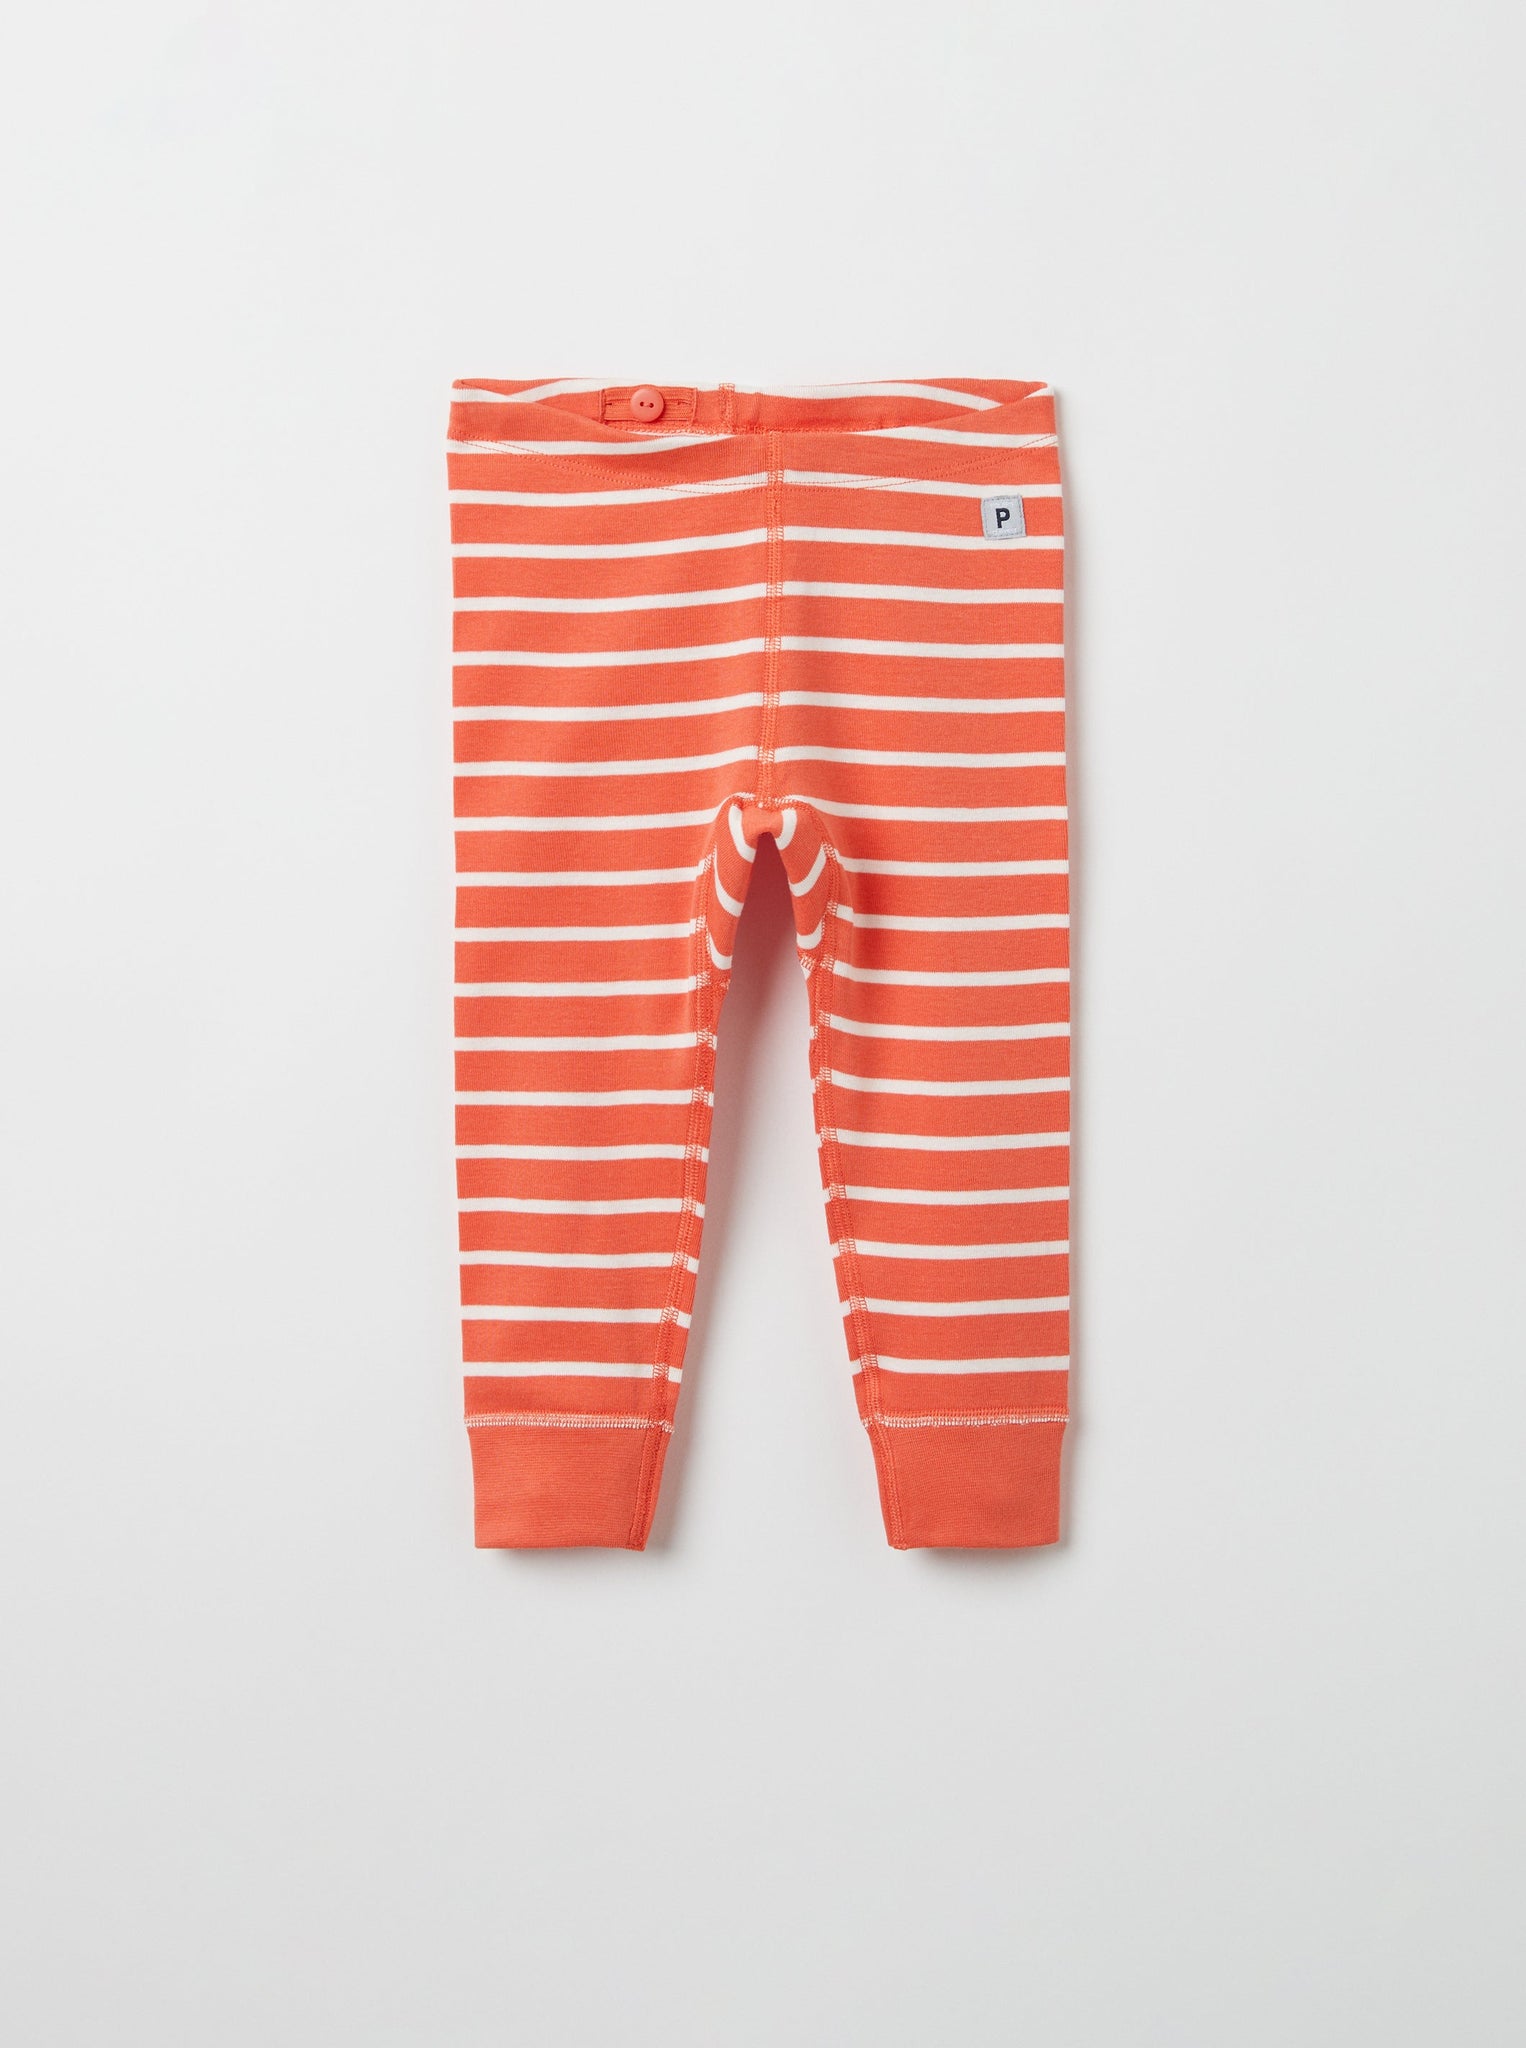 Organic Cotton Orange Baby Leggings from the Polarn O. Pyret babywear collection. Ethically produced kids clothing.